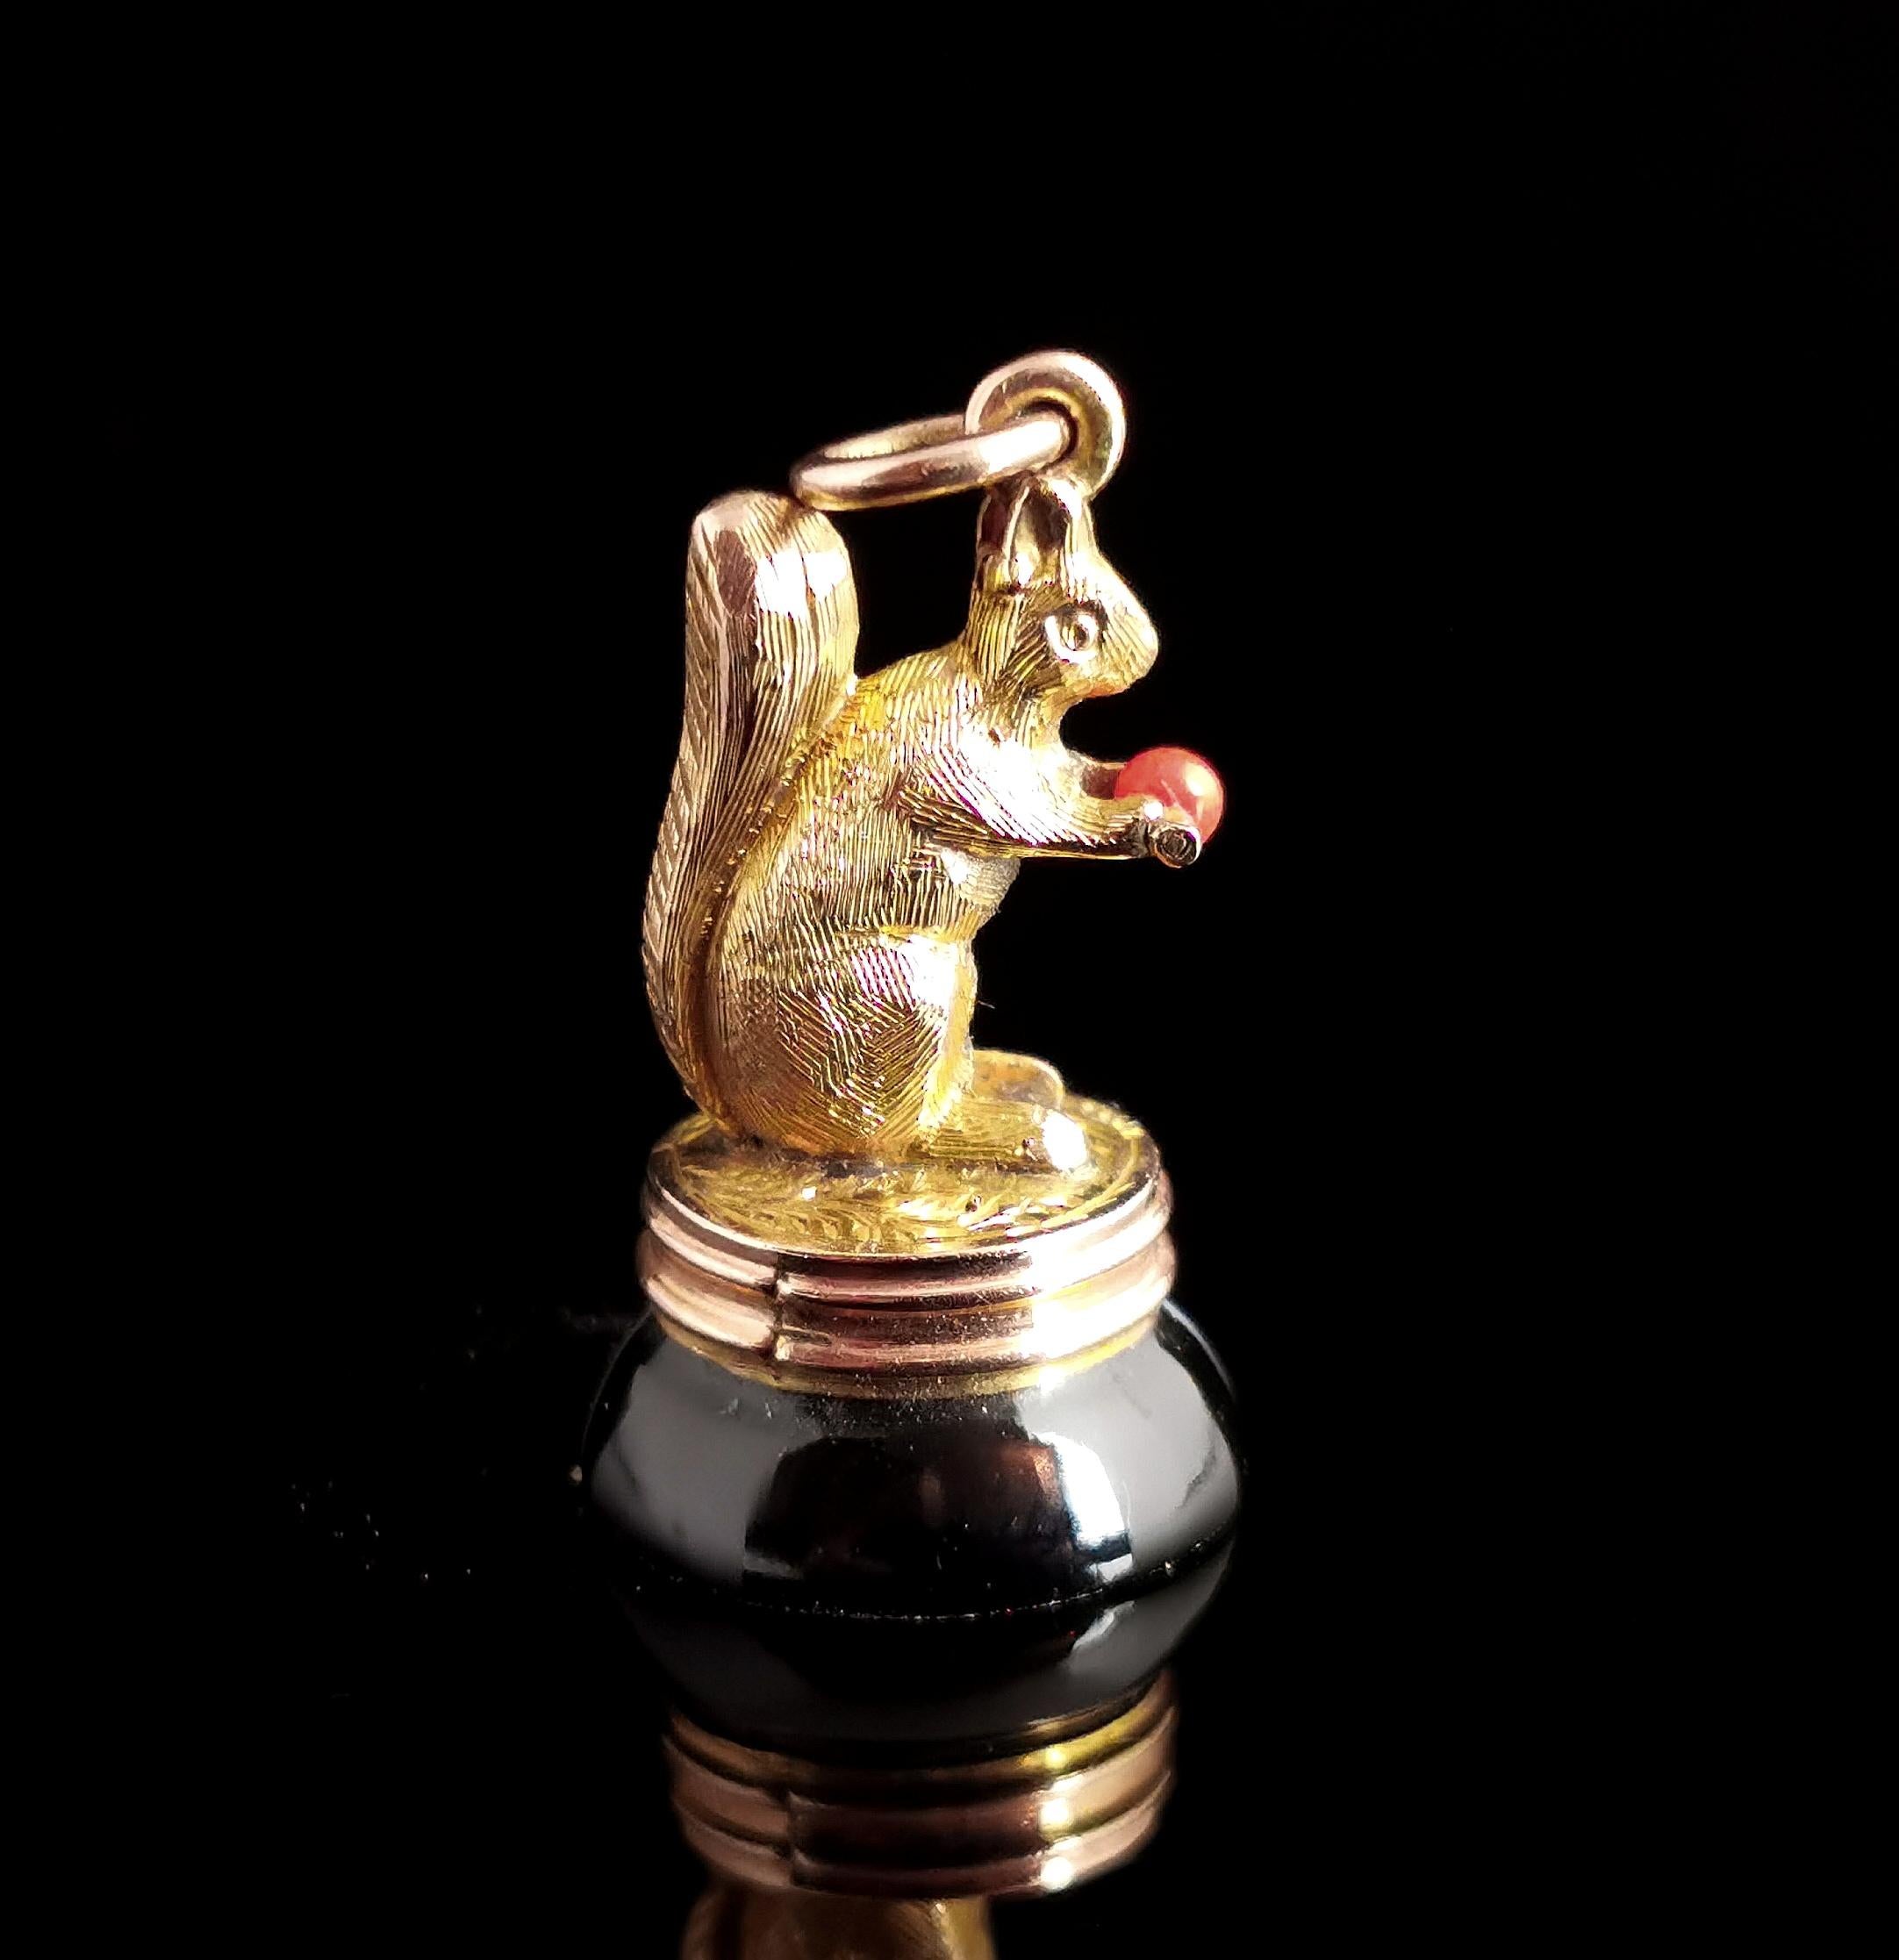 A stunning and rare antique 9kt gold seal fob pendant.

A figural seal fob intricately designed as a squirrel holding a nut or acorn made from a tiny red rubrum coral bead.

The matrix is formed from a high polished piece of black banded agate with